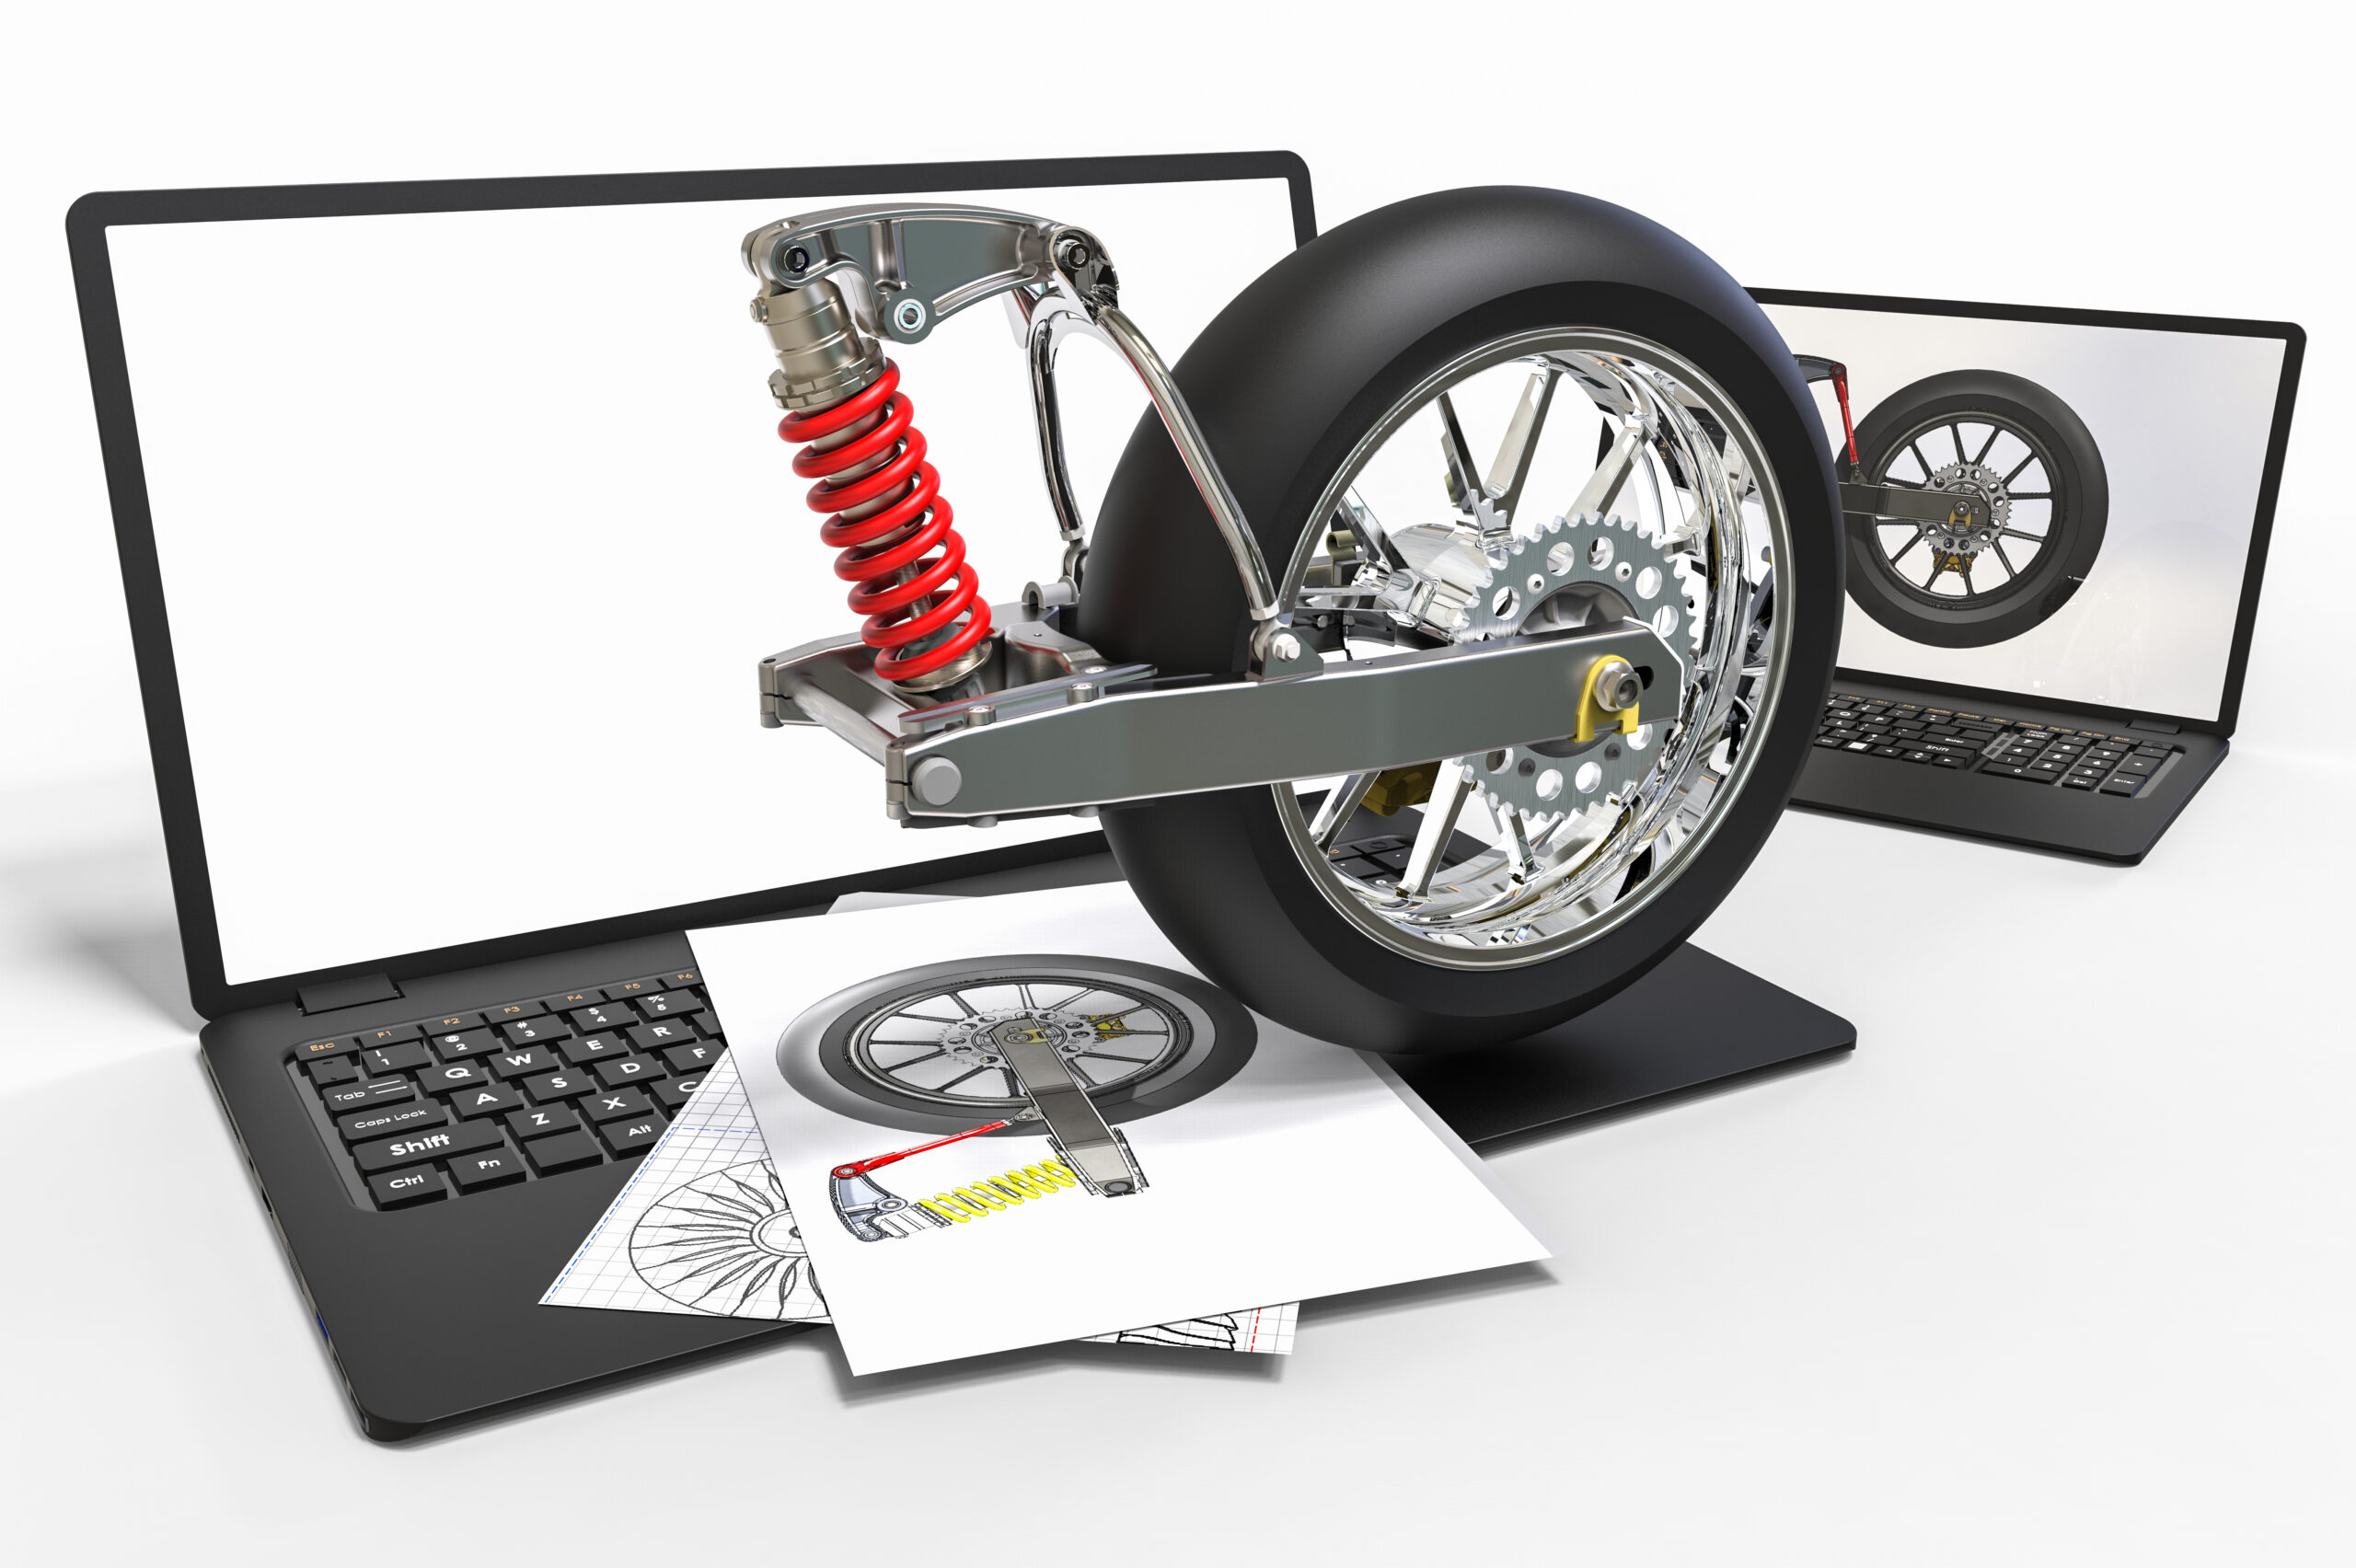 3d,Render,Image,Of,A,Motorbike,Suspension,And,Two,Laptops